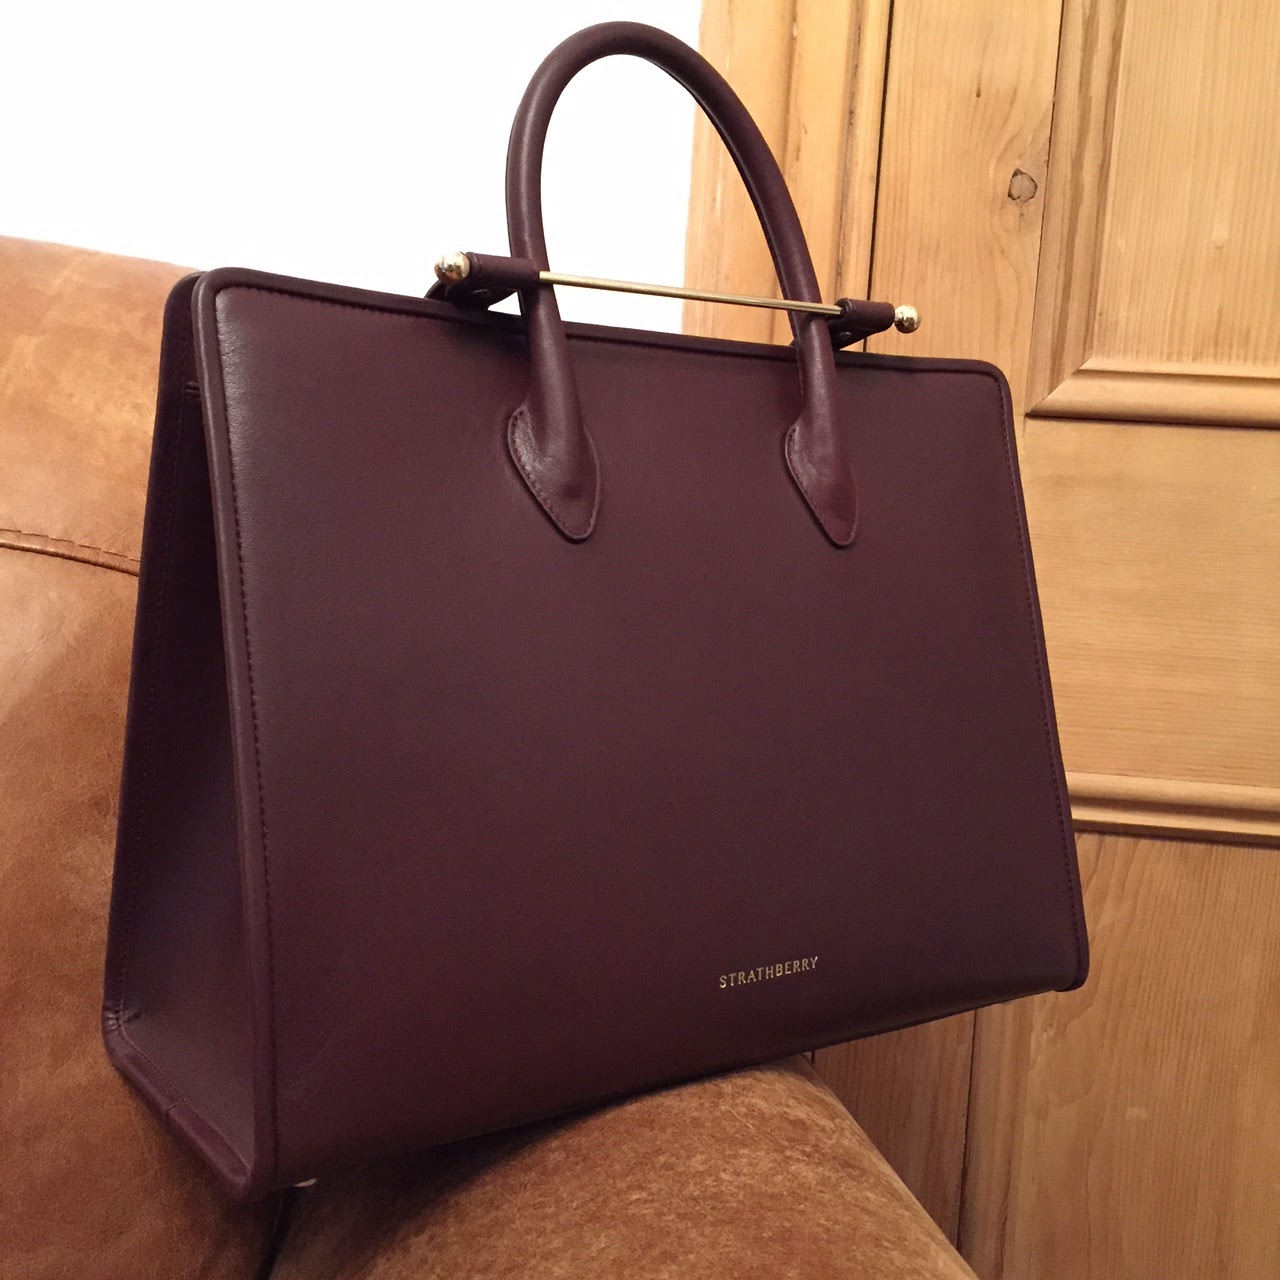 strathberry midi tote review